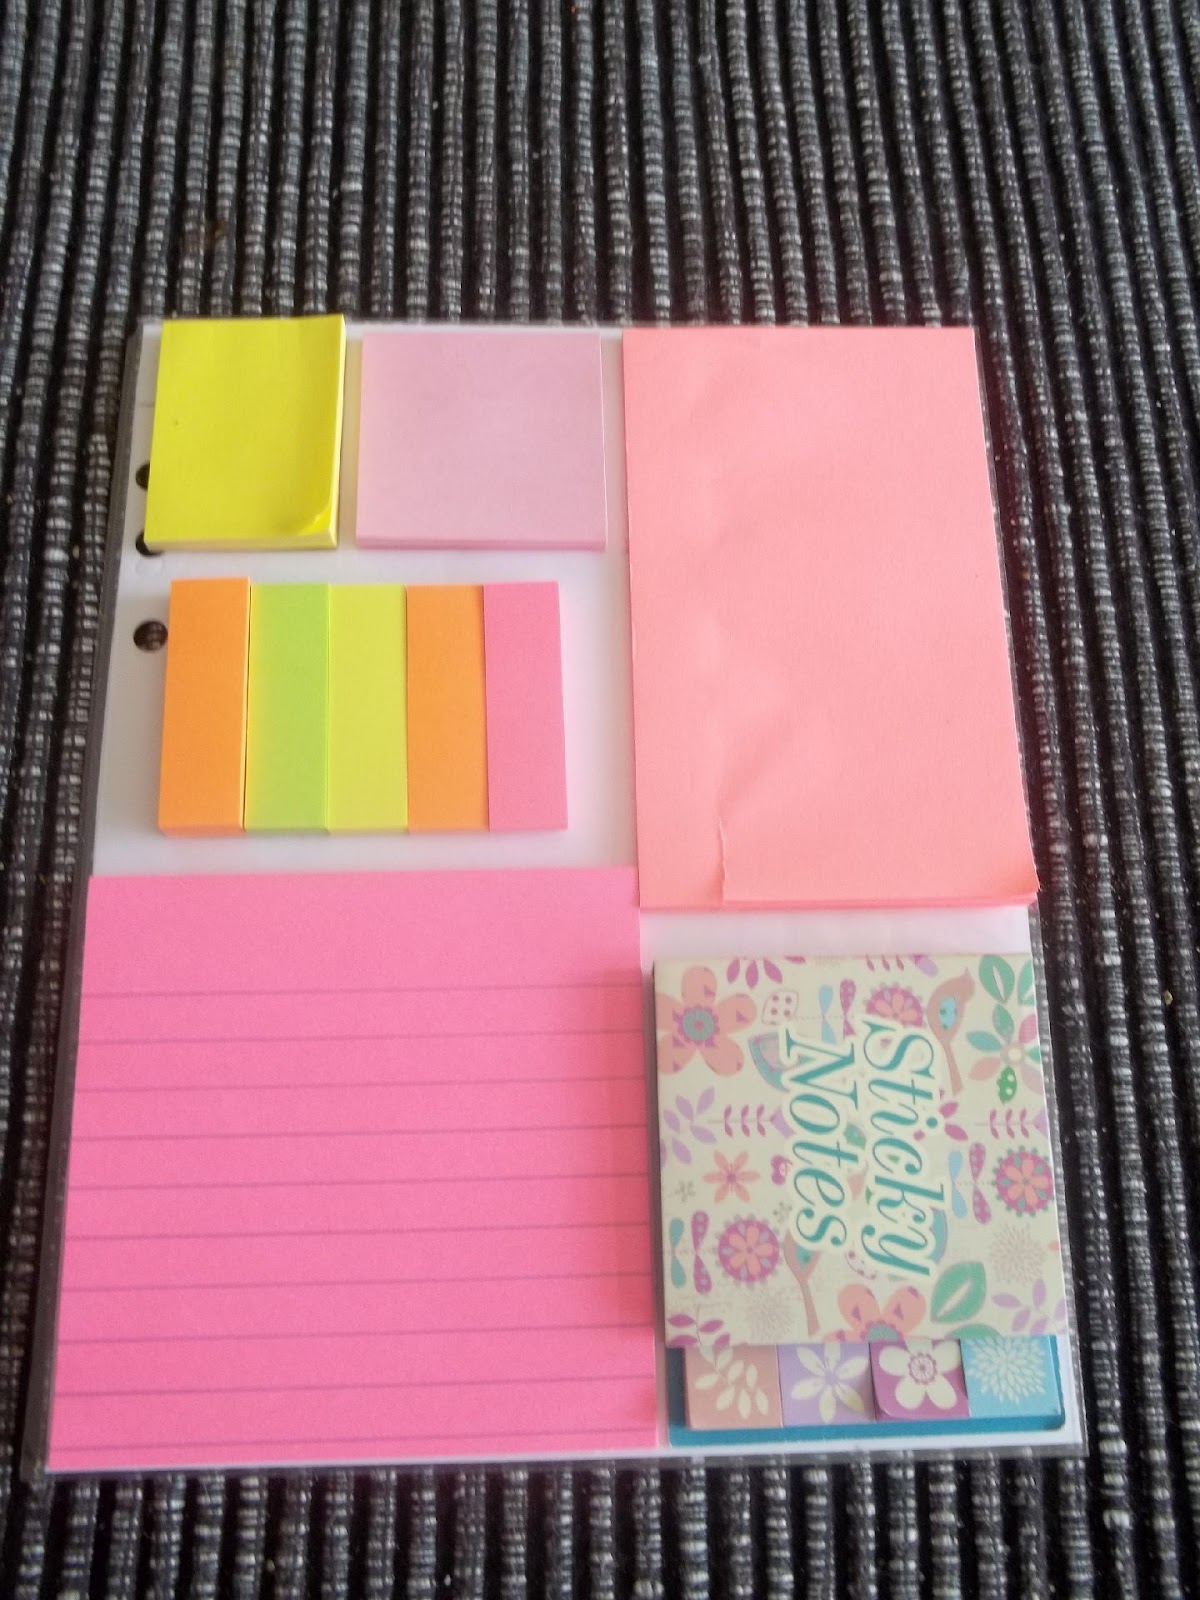 It's My Life!: A Sticky Note Wall